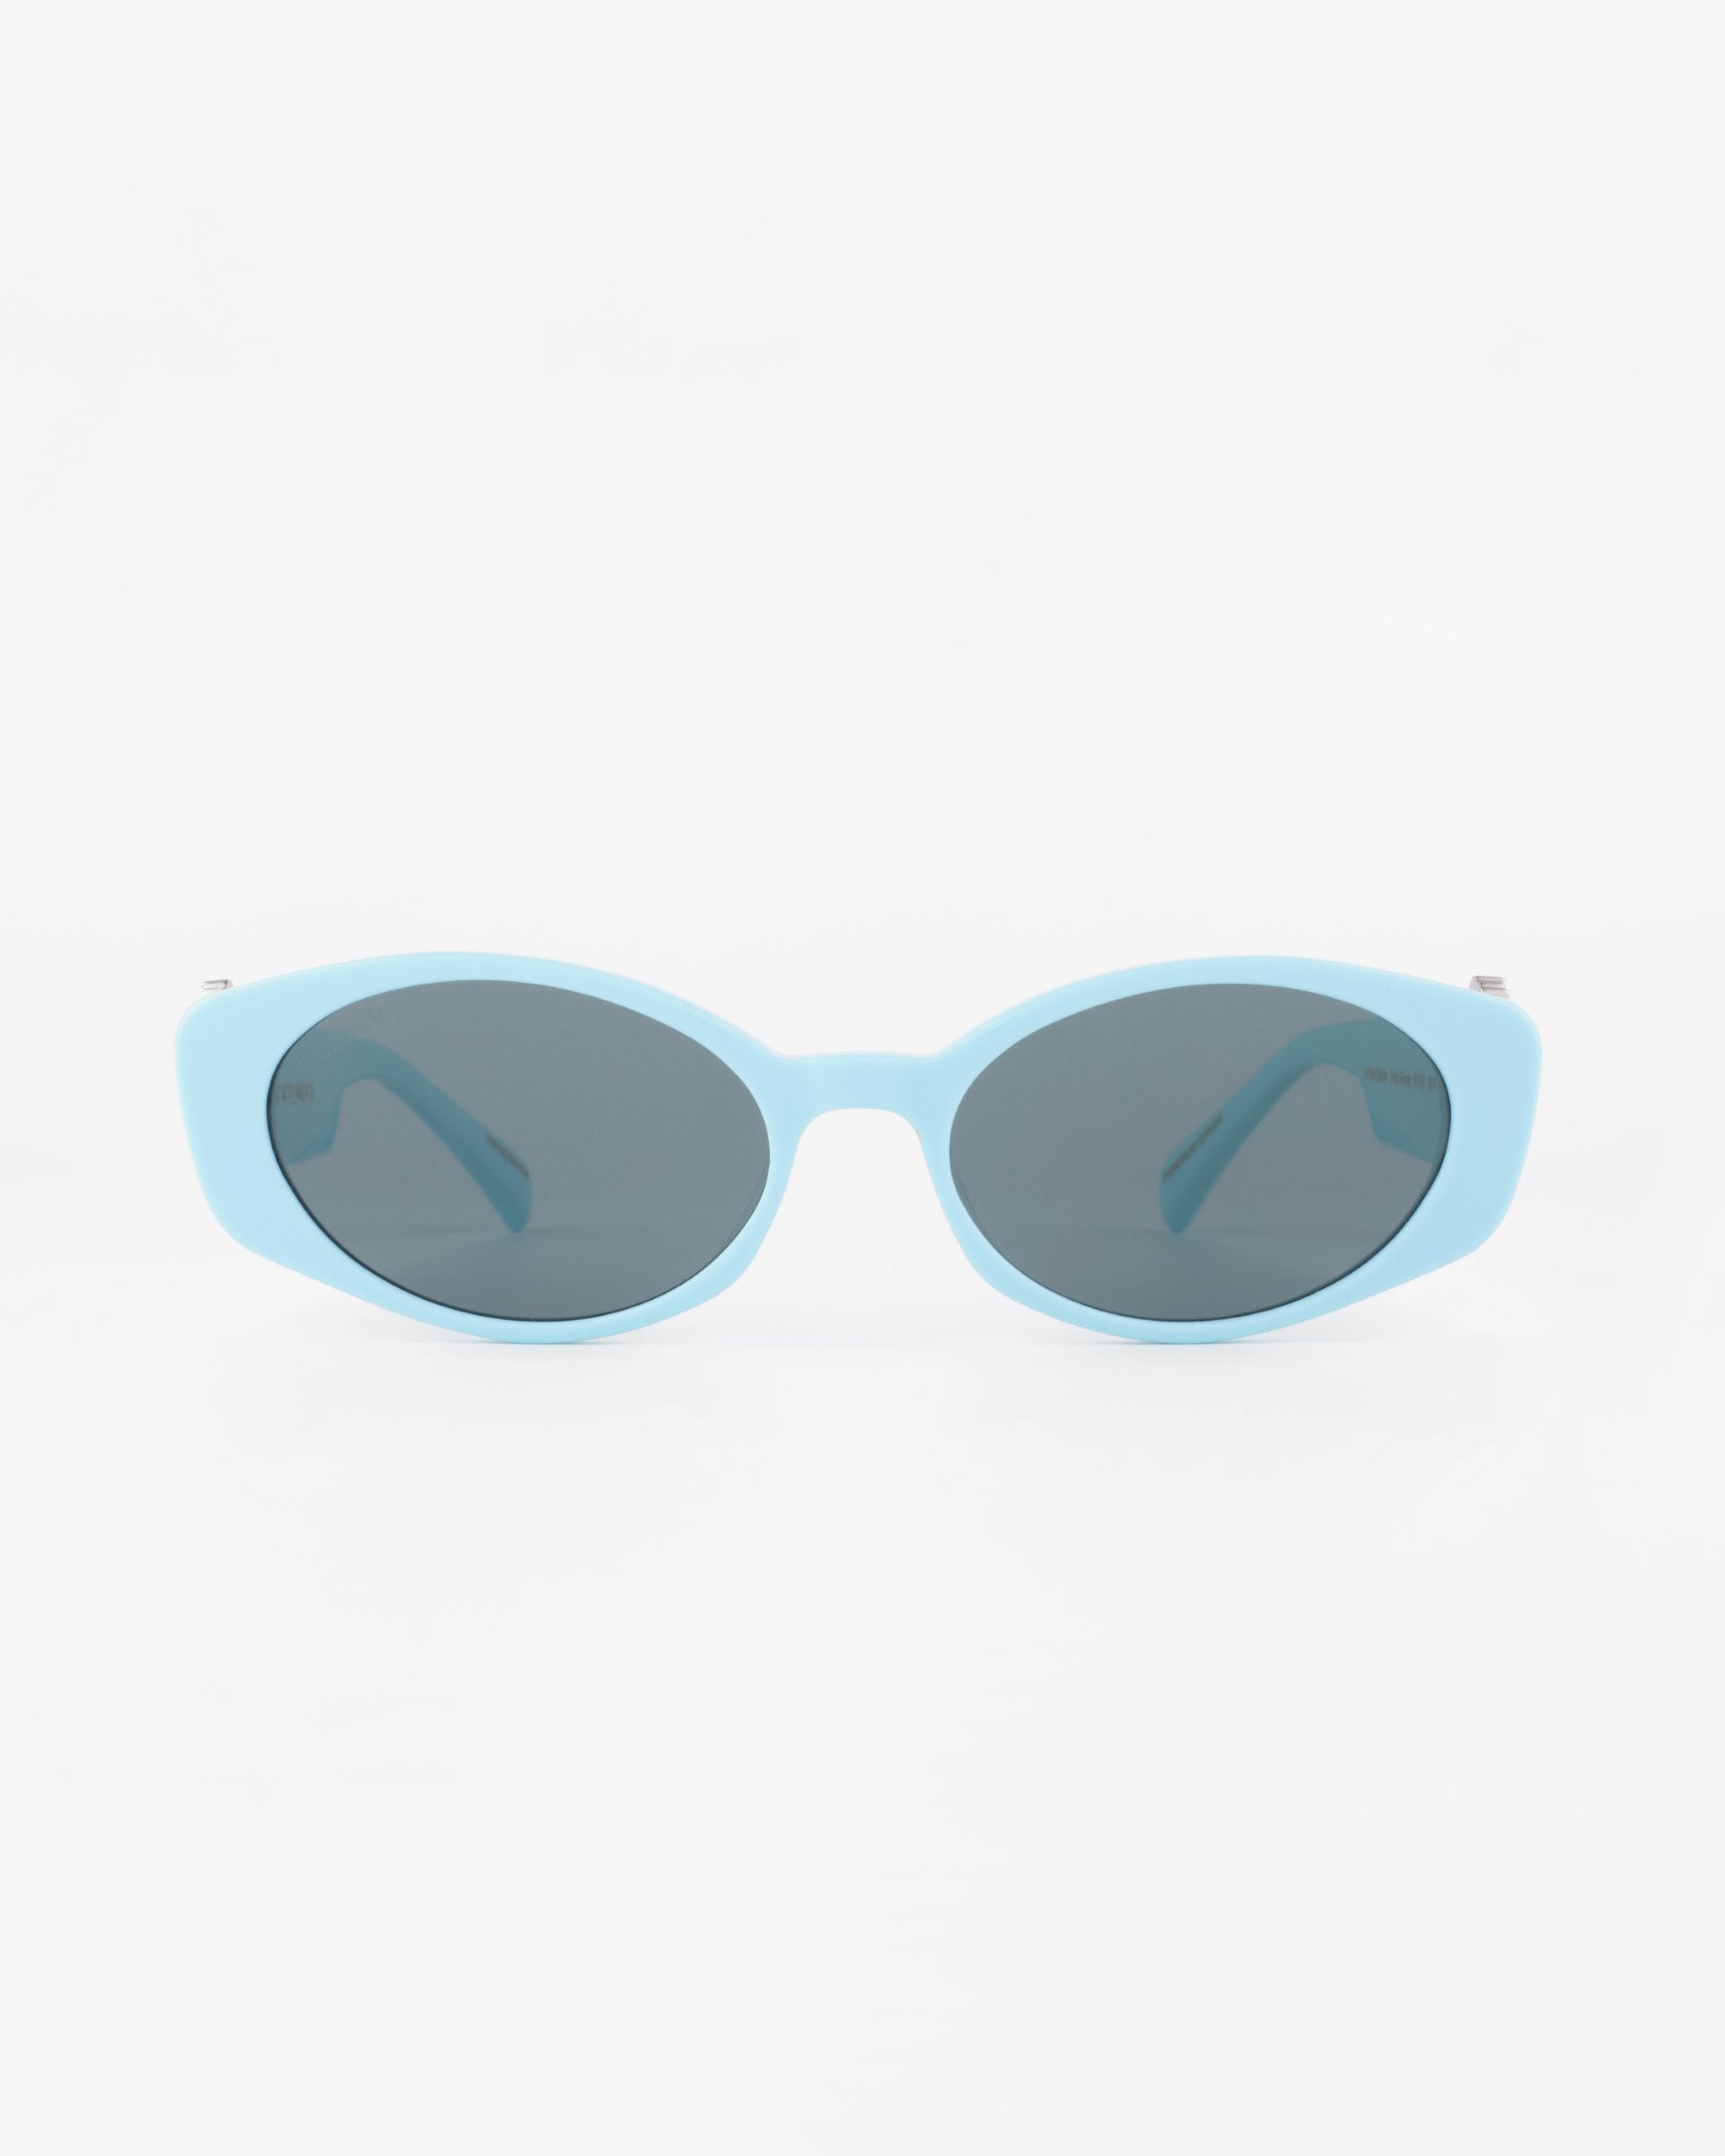 A pair of light blue oval sunglasses with dark tinted, ultra-lightweight nylon lenses offering 100% UVA & UVB protection. The background is plain white, making the For Art's Sake® Frida Portrait sunglasses the focal point of the image.